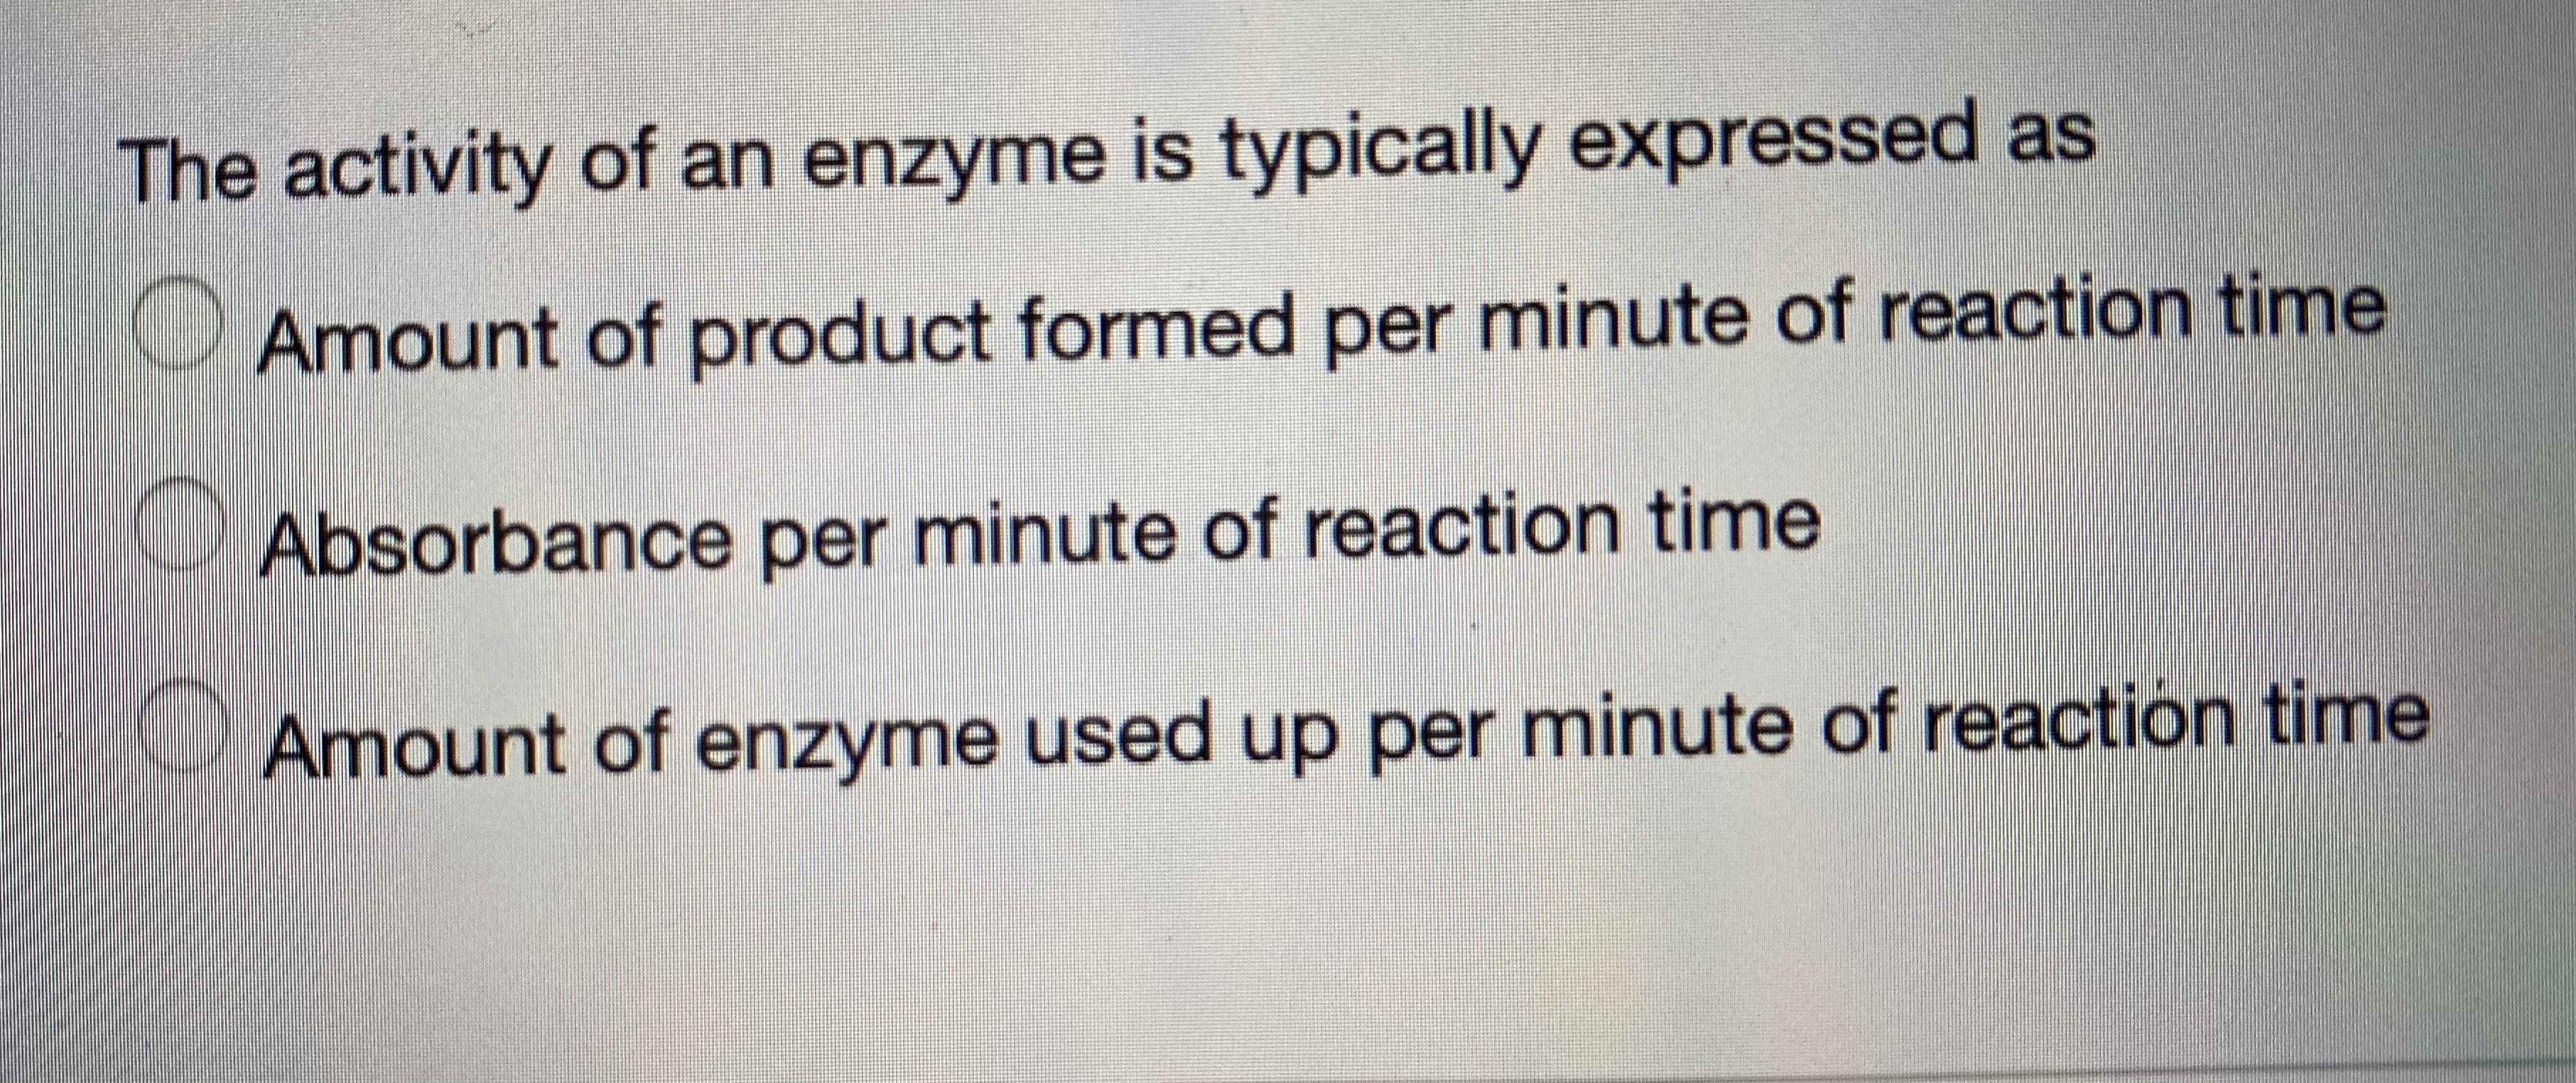 The activity of an enzyme is typically expressed as
Amount of product formed per minute of reaction time
